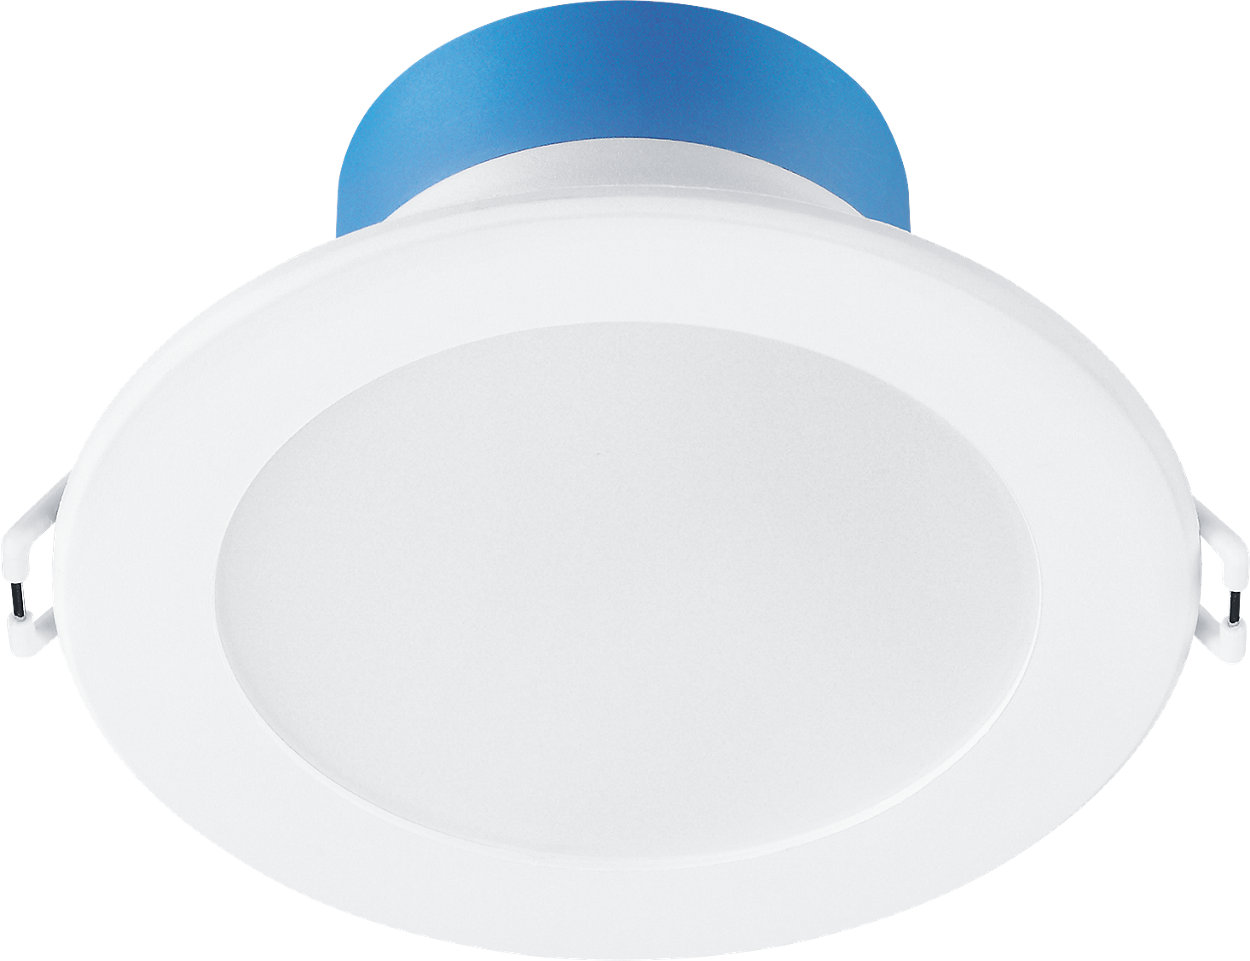 The perfect energy efficient LED replacement for conventional downlights